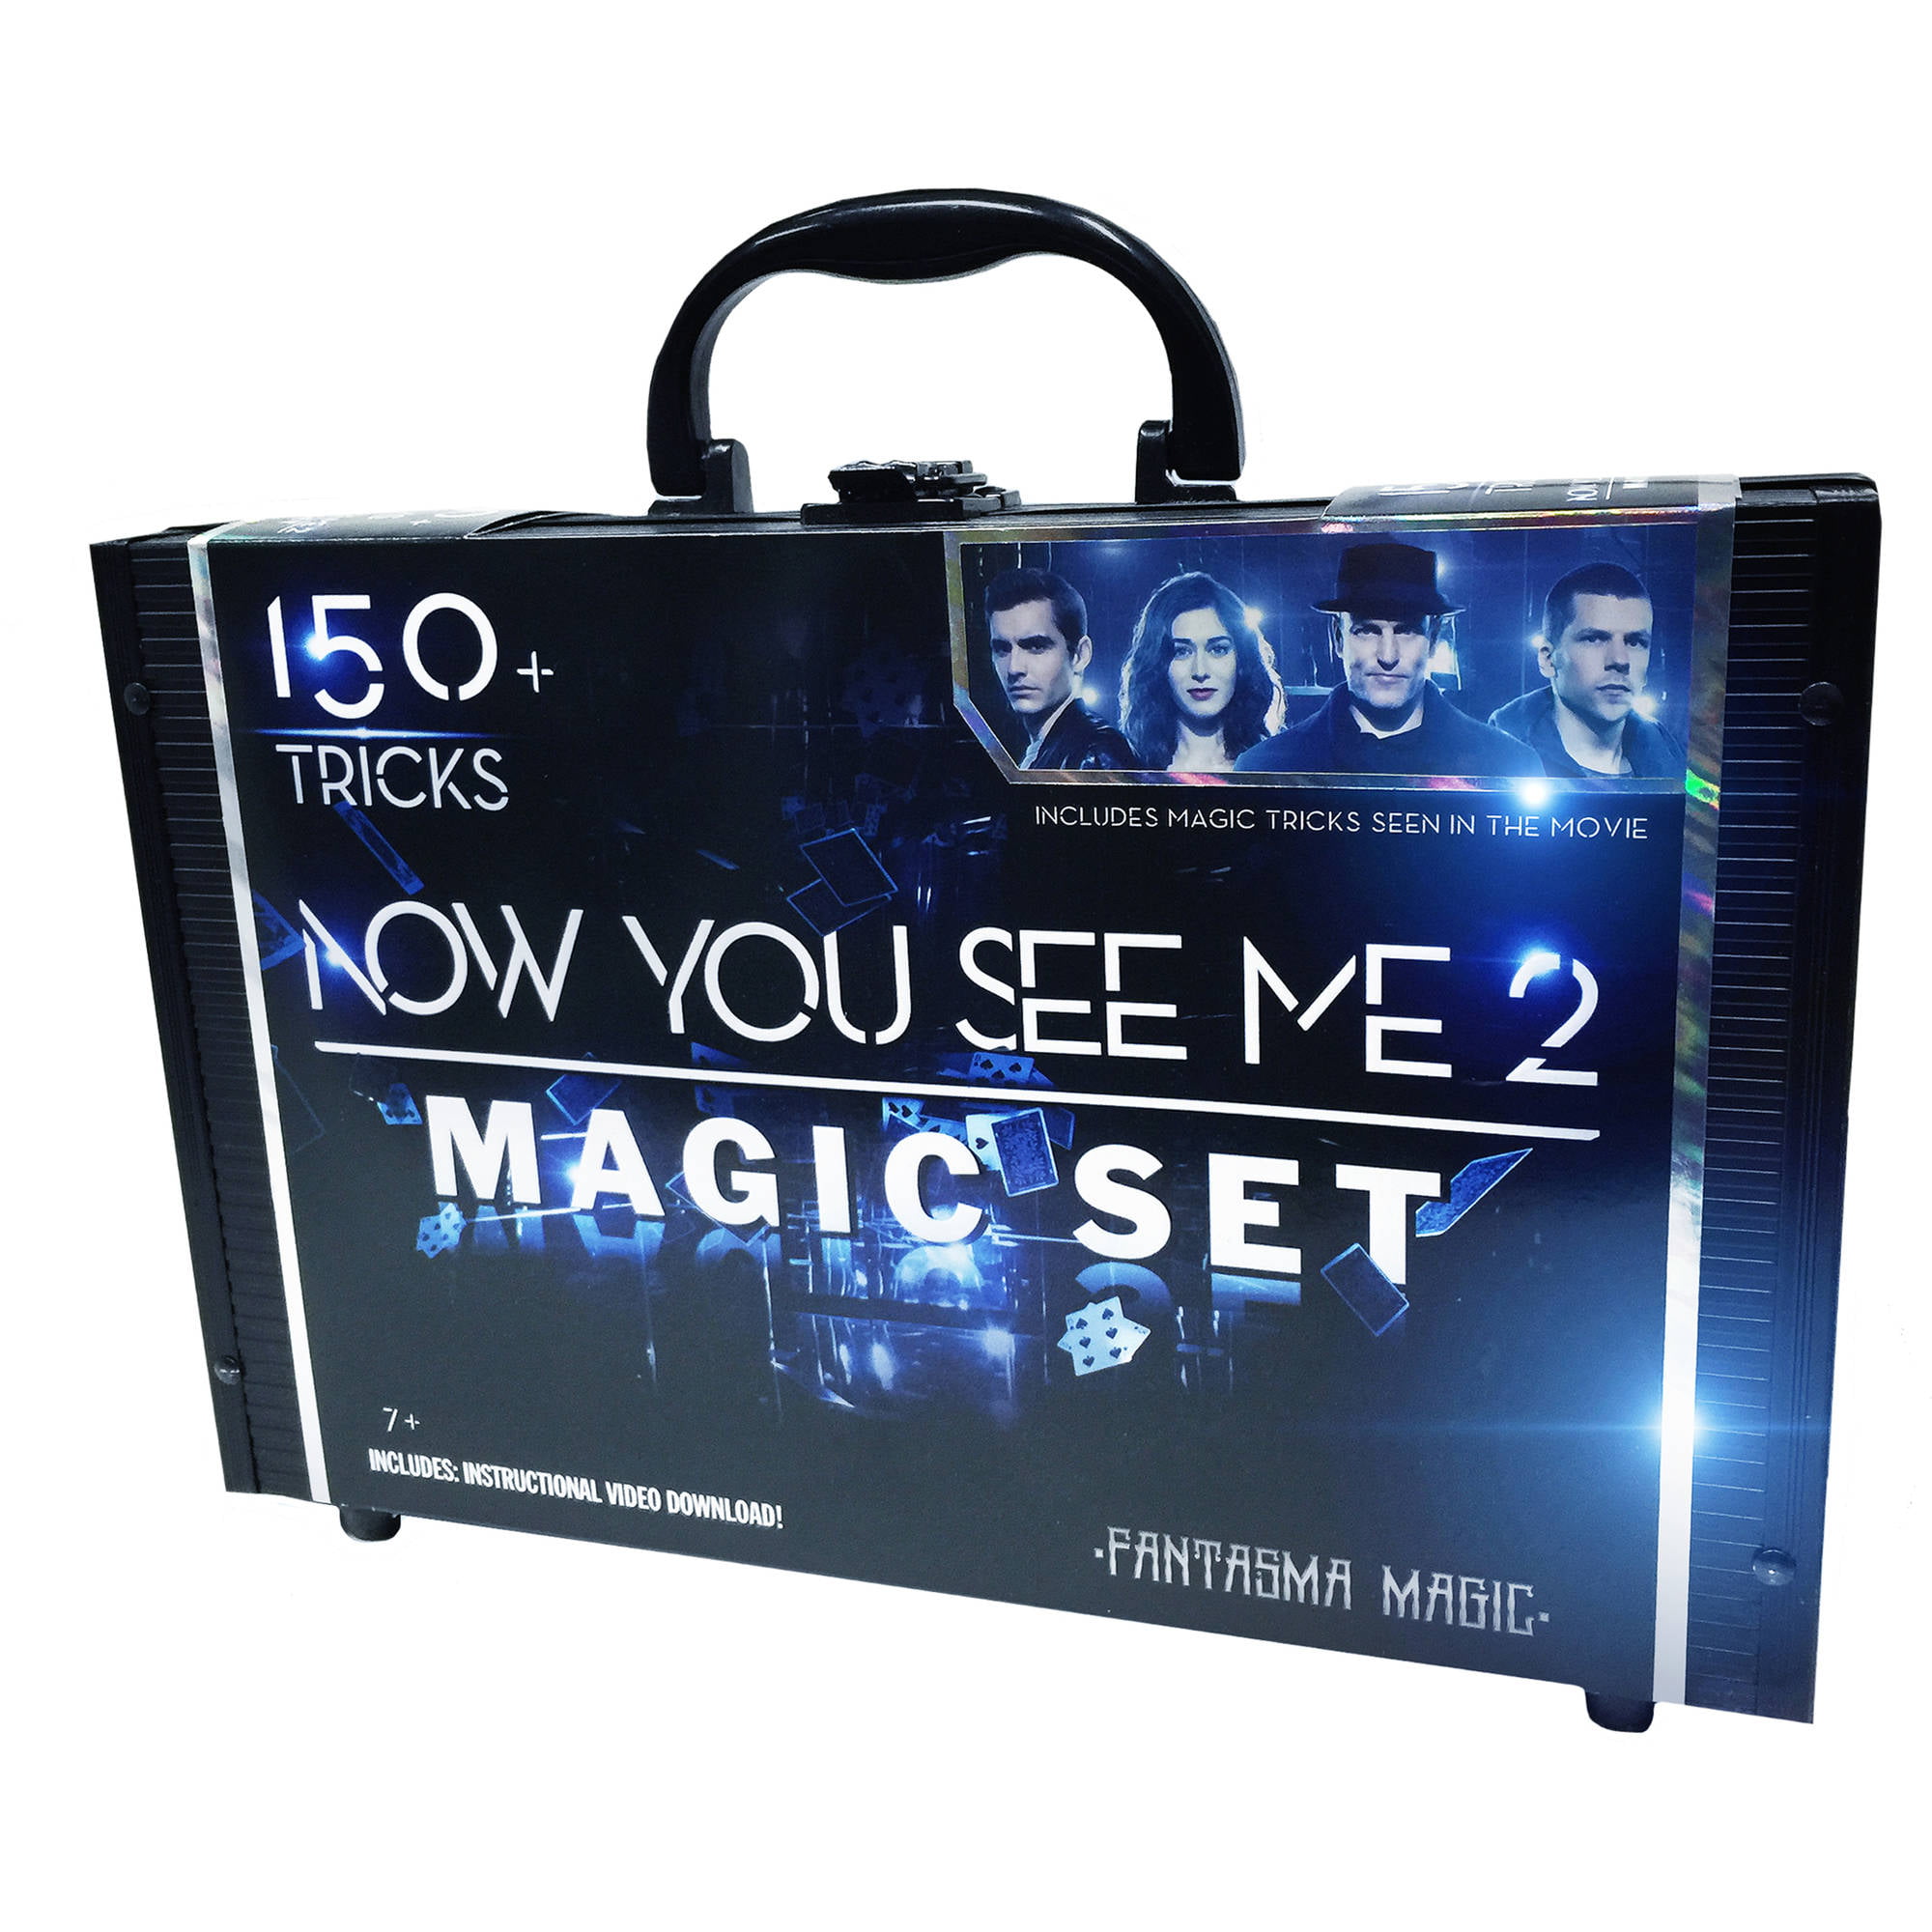 Now You See Me 2 Magic Case of 150 Tricks One Size for sale online 